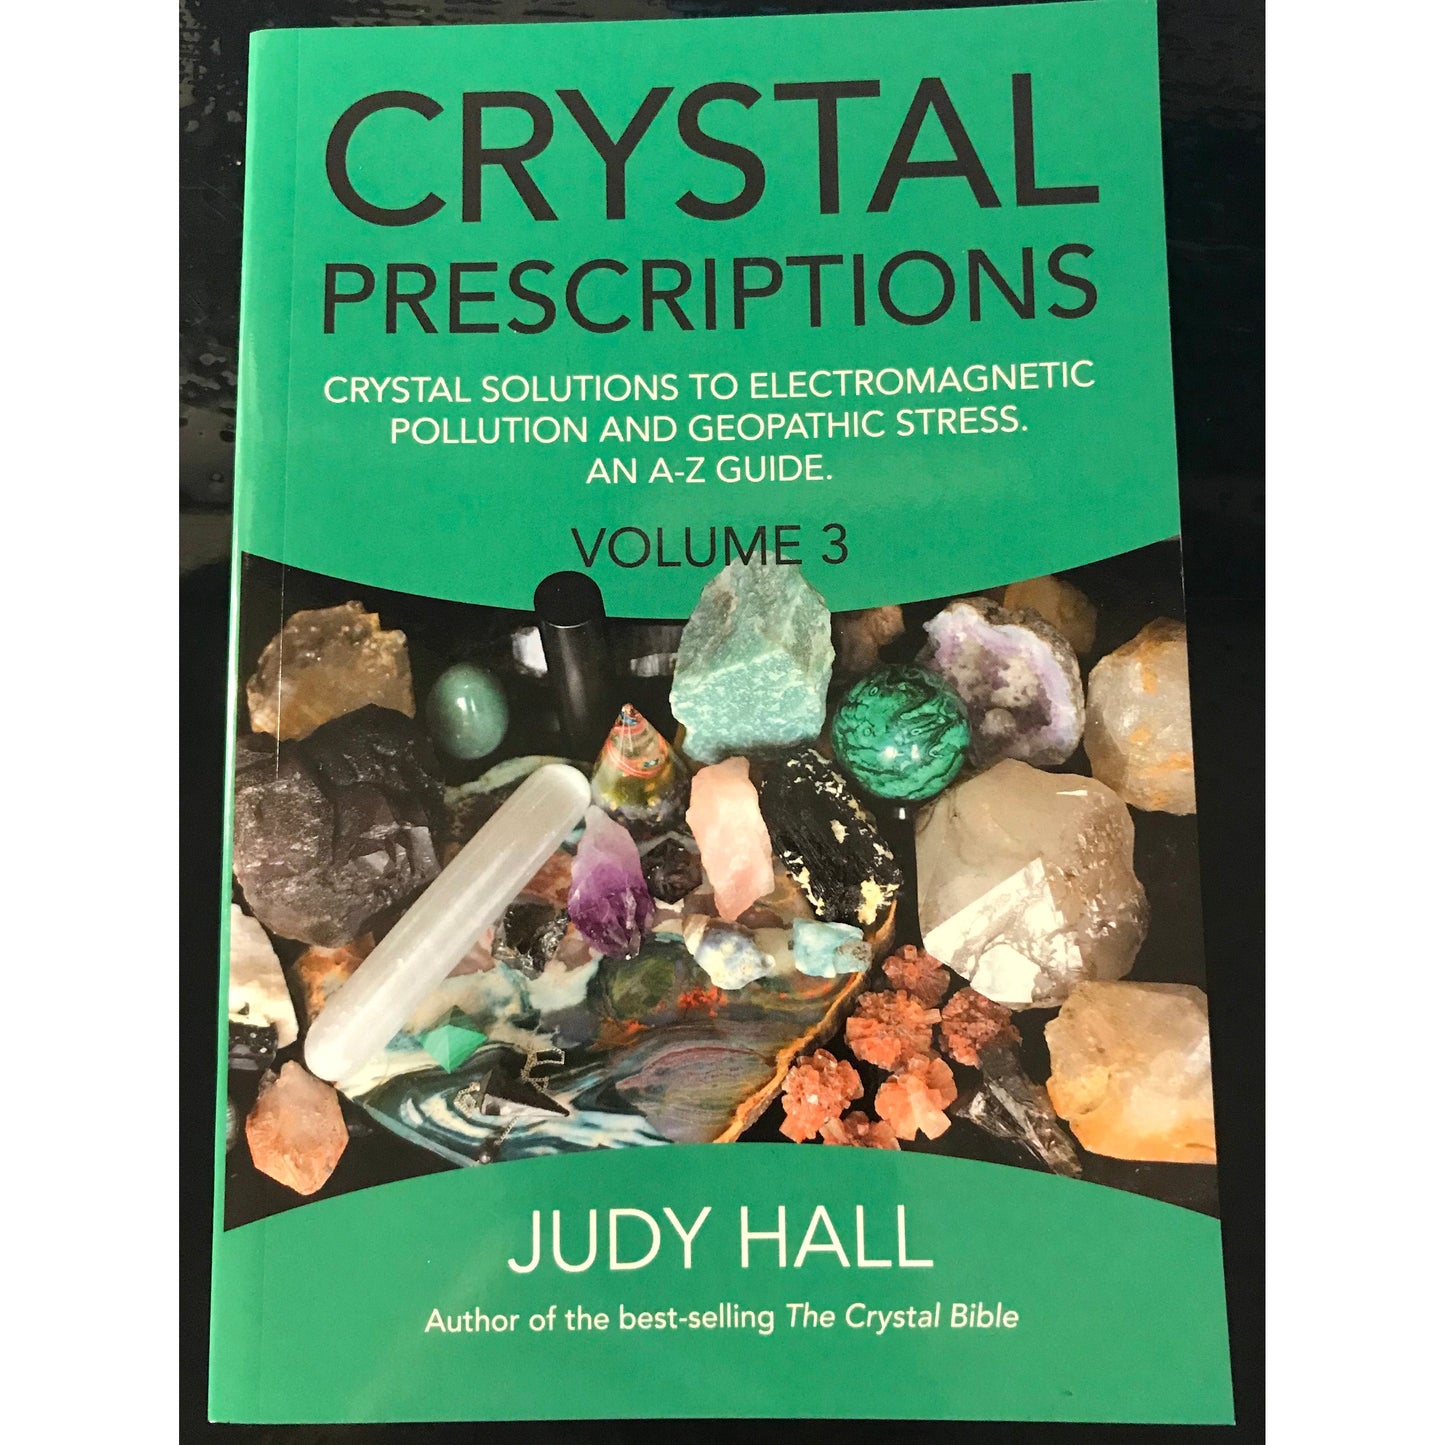 Crystal Prescriptions, Volume 3 by Best-Selling Author Judy Hall